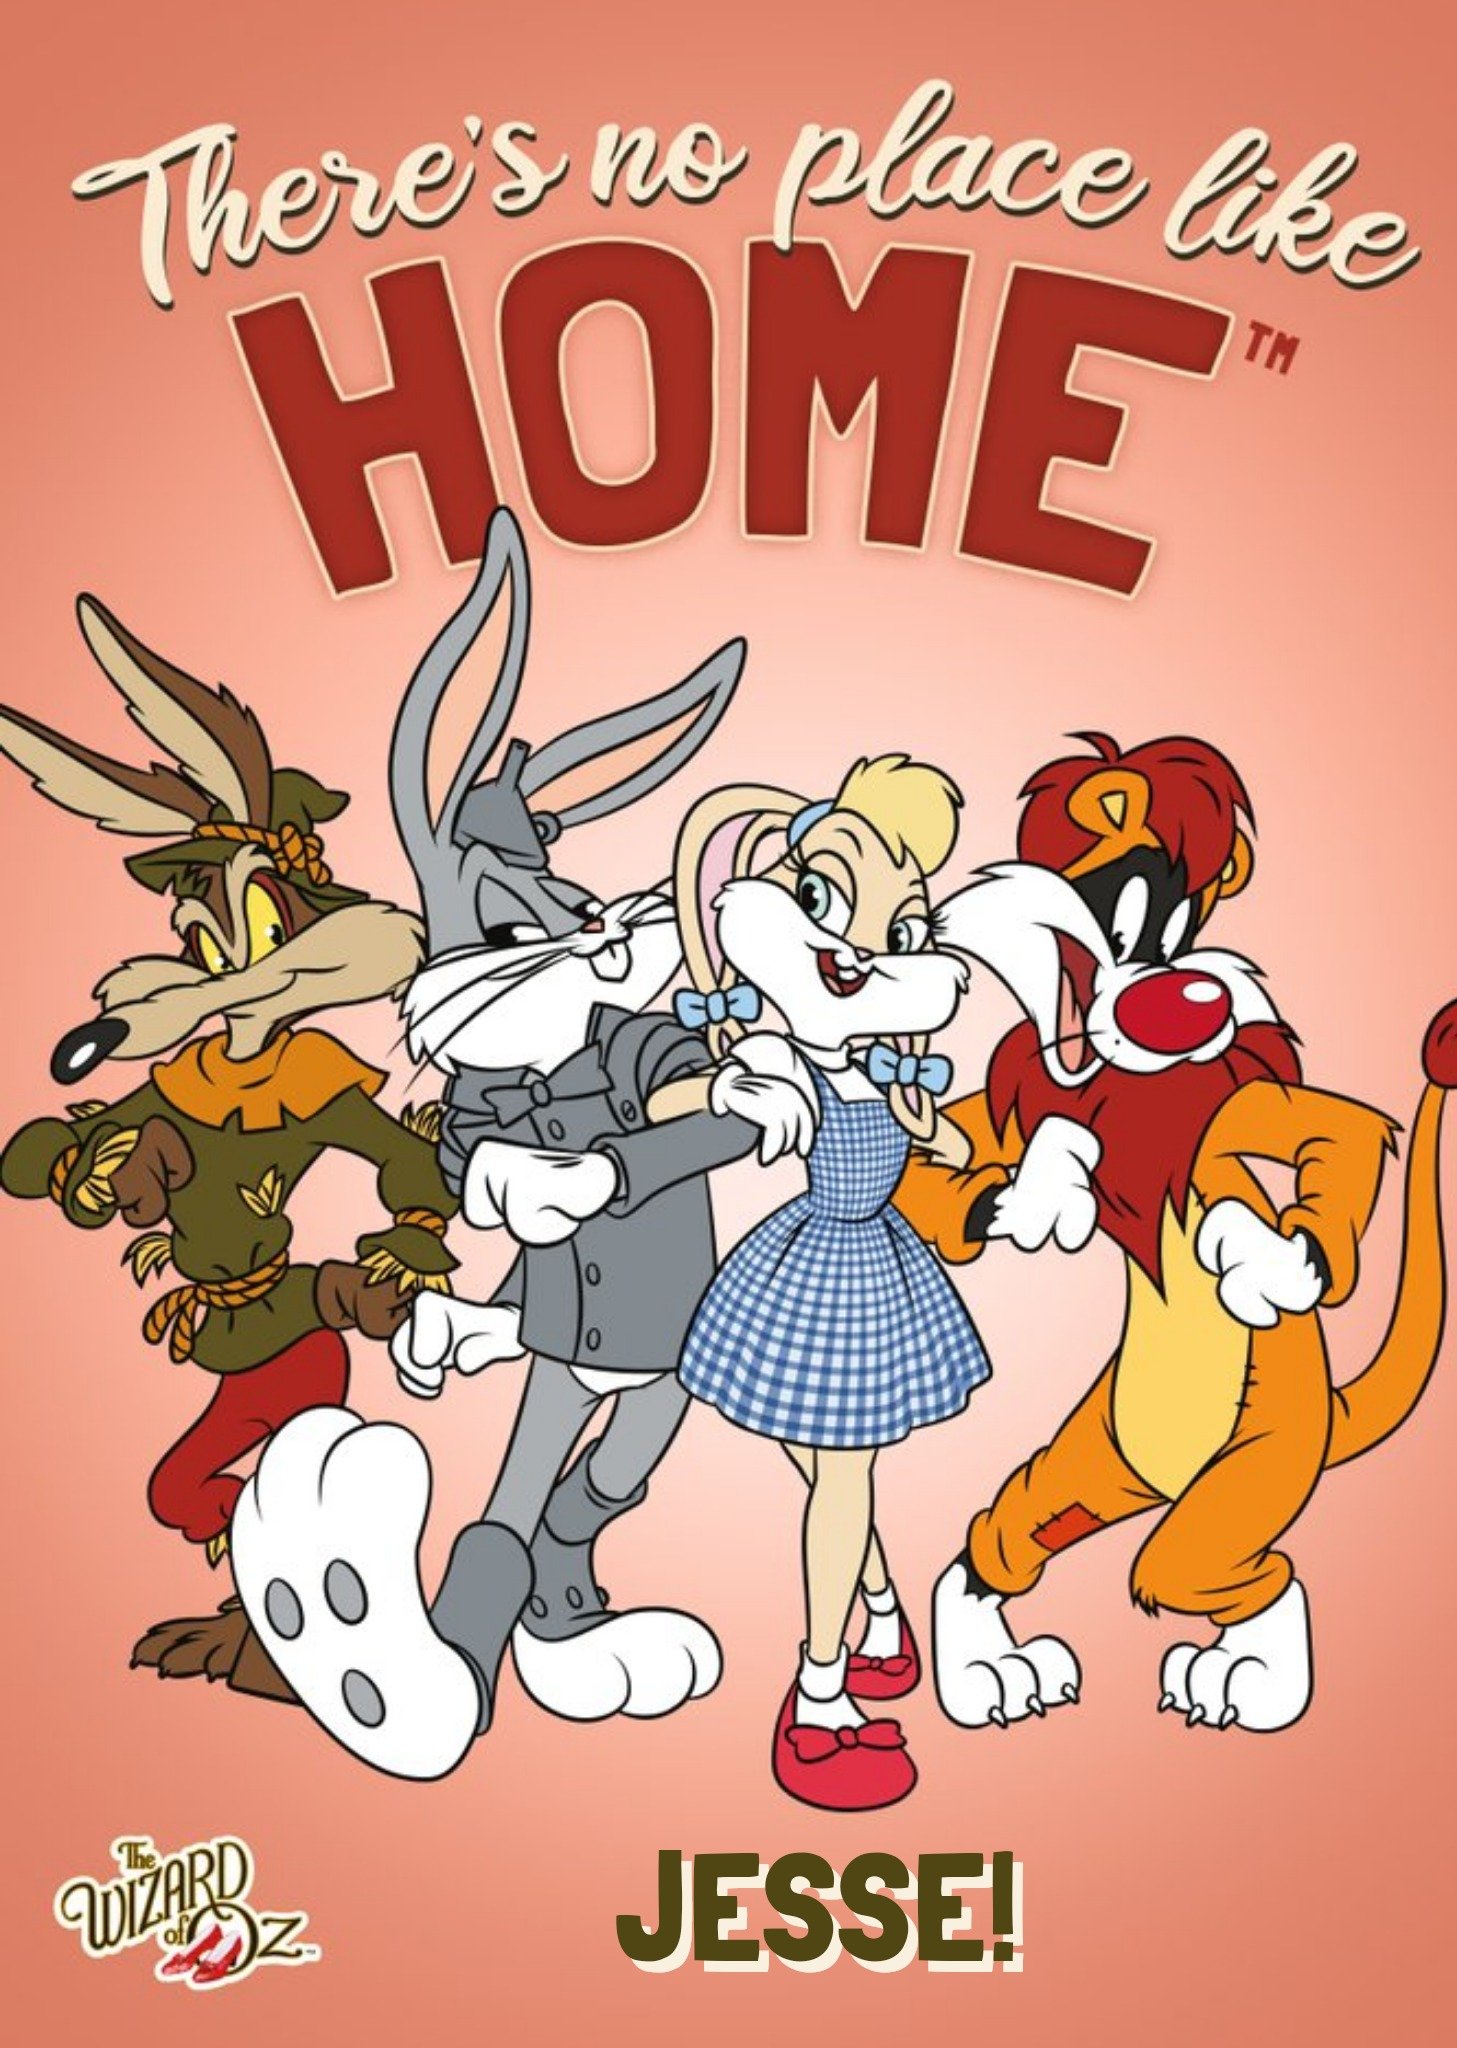 Moonpig Warner Brothers 100 There's No Place Like Home Card Ecard